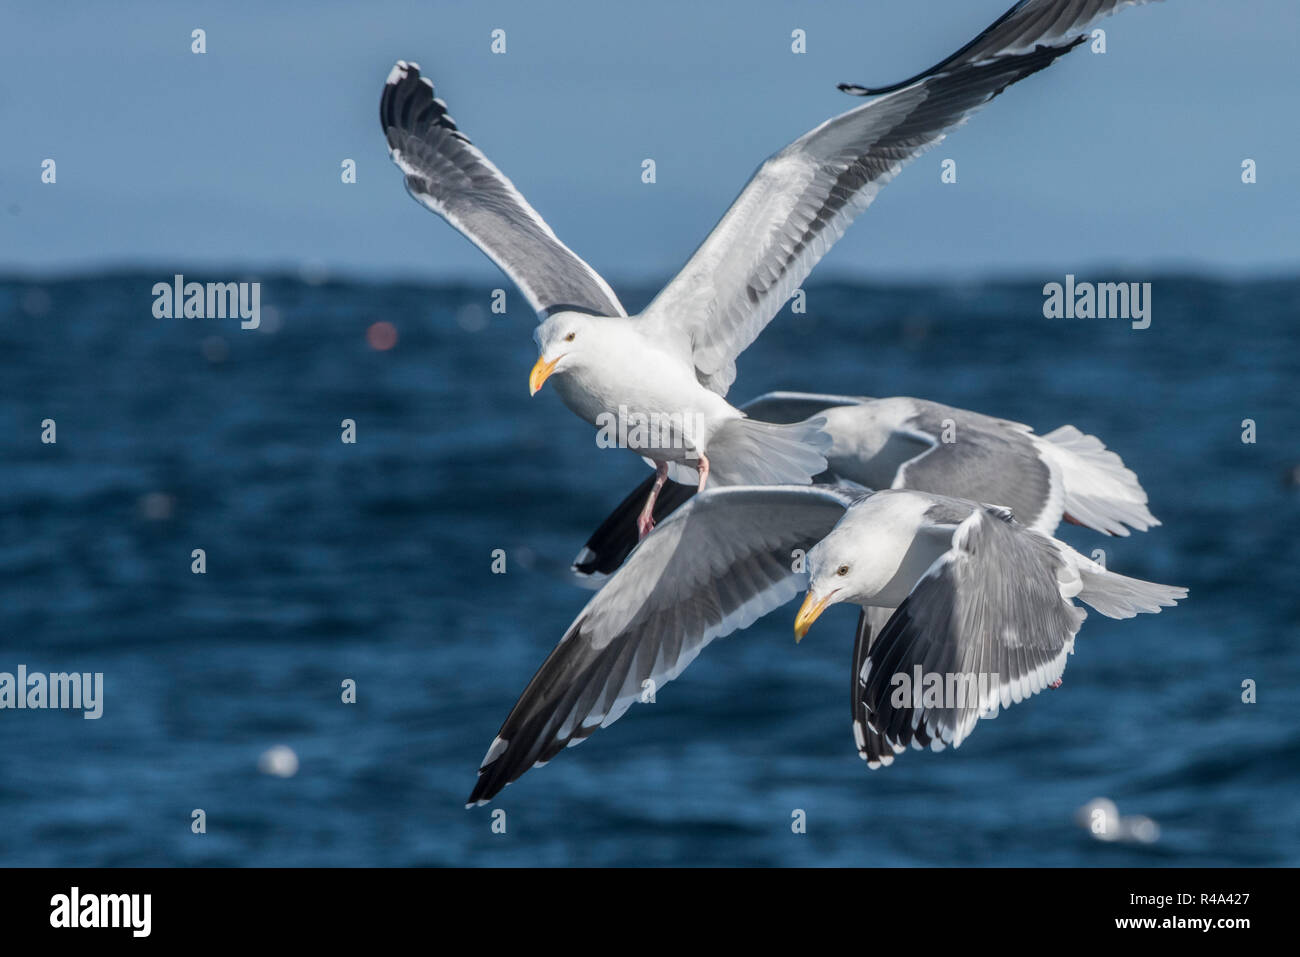 A flock of seagulls, specifically the western gull (Larus occidentalis) feeding out in open ocean off the coast of California. Stock Photo